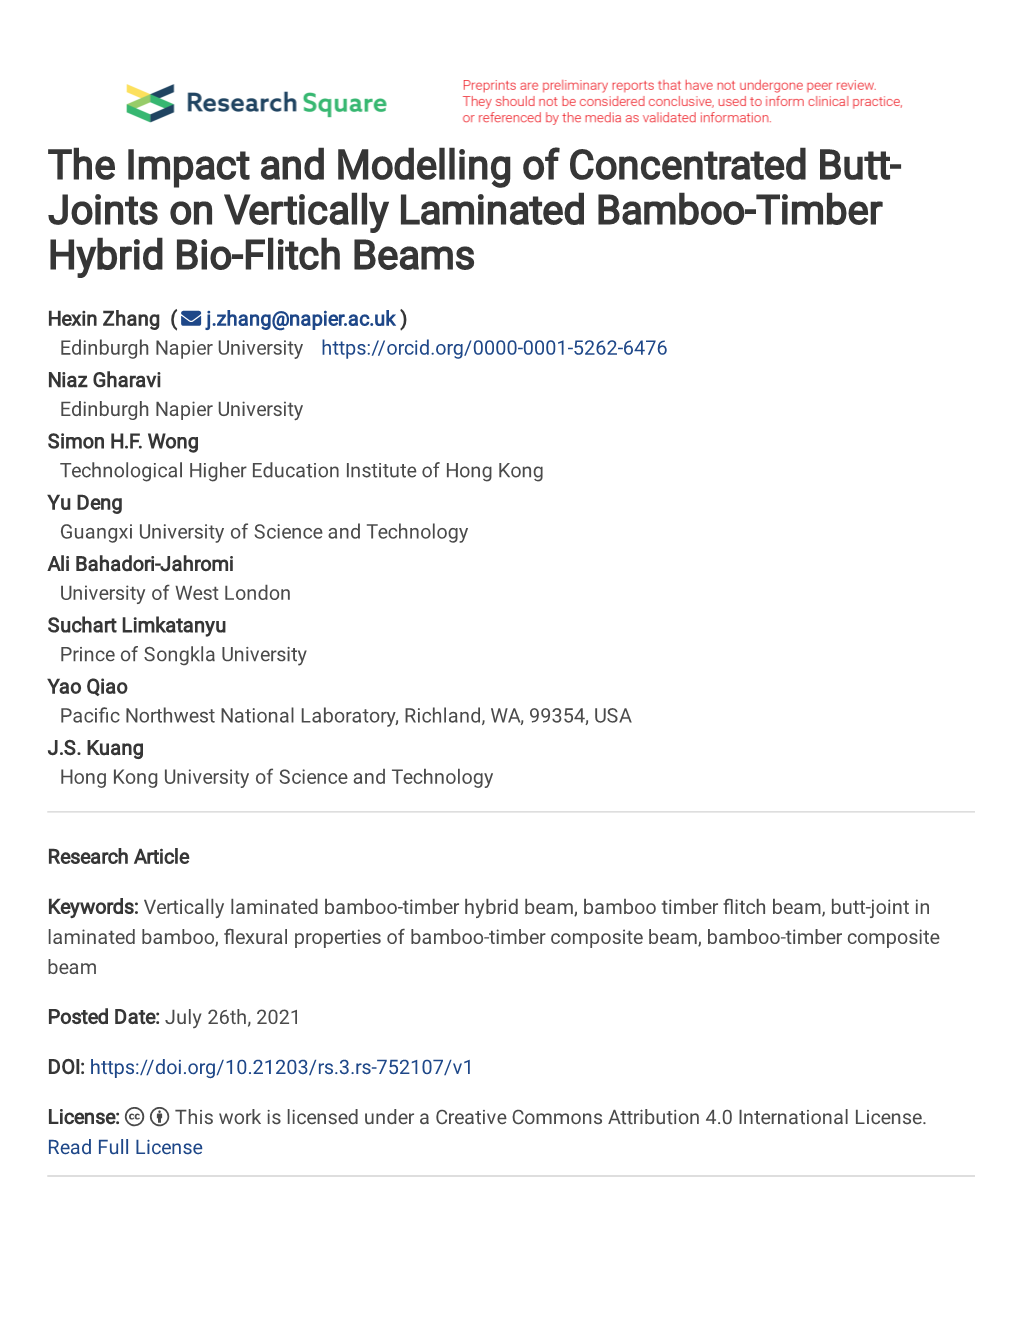 Joints on Vertically Laminated Bamboo-Timber Hybrid Bio-Flitch Beams